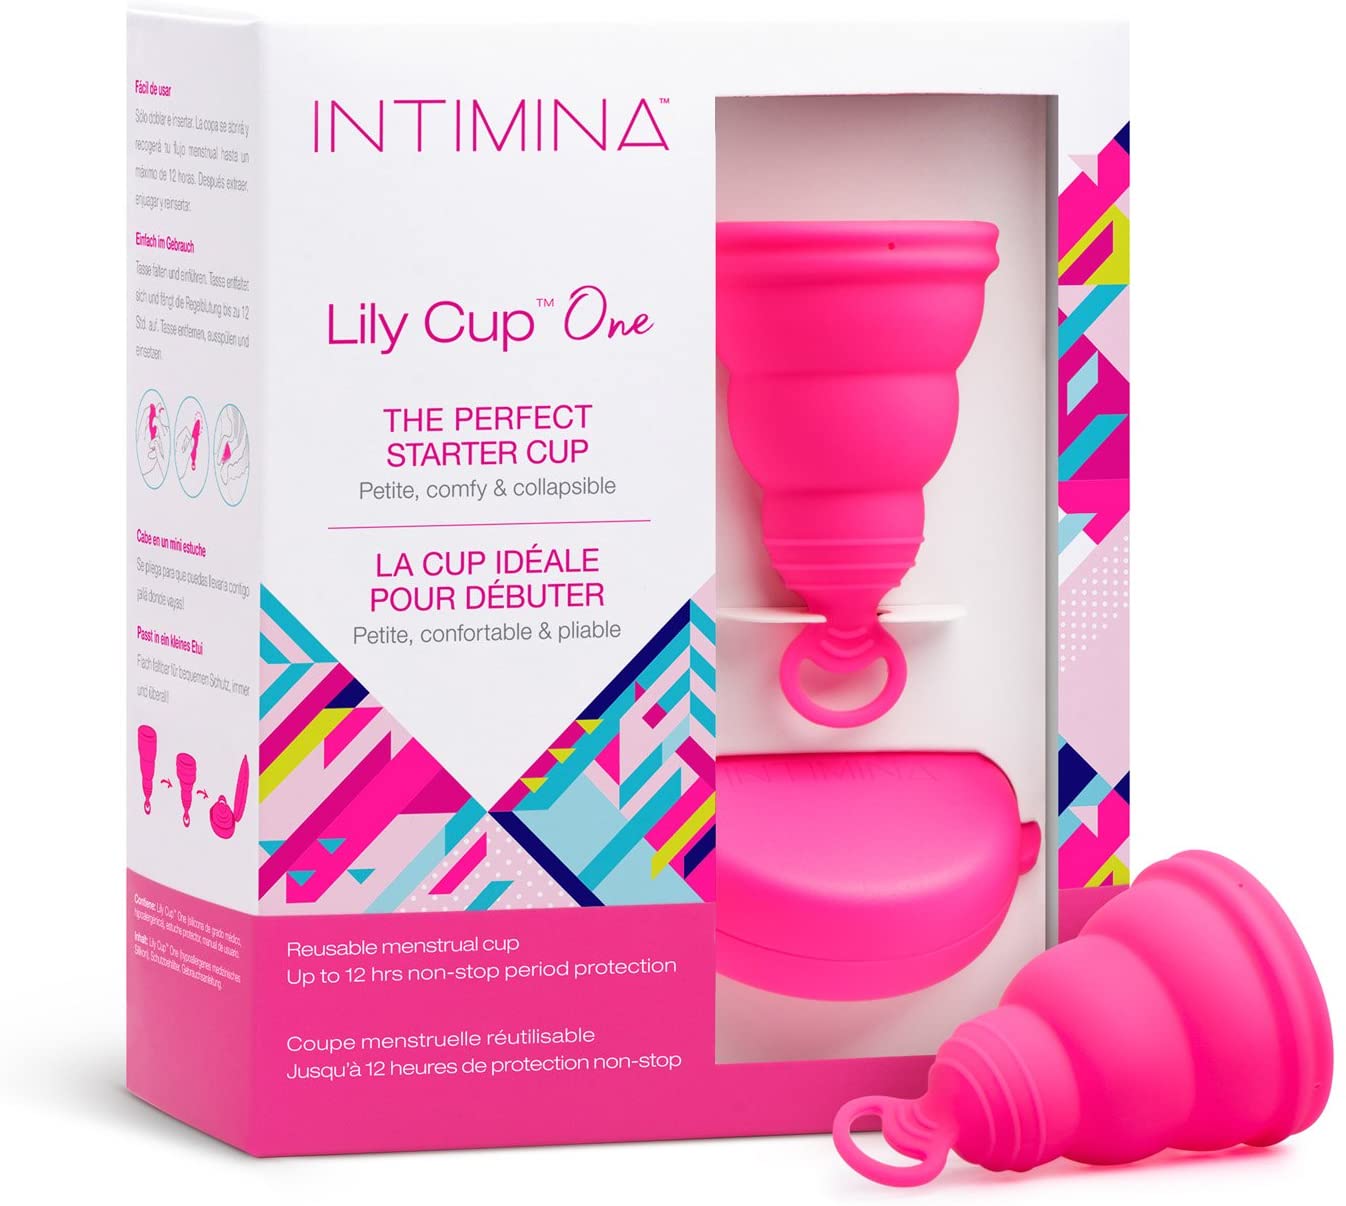 Lily Cup One The Perfect Starter  Menstrual Cup Cup #6065 - Intimina product available at family pharmacy online buy now at qatar doha